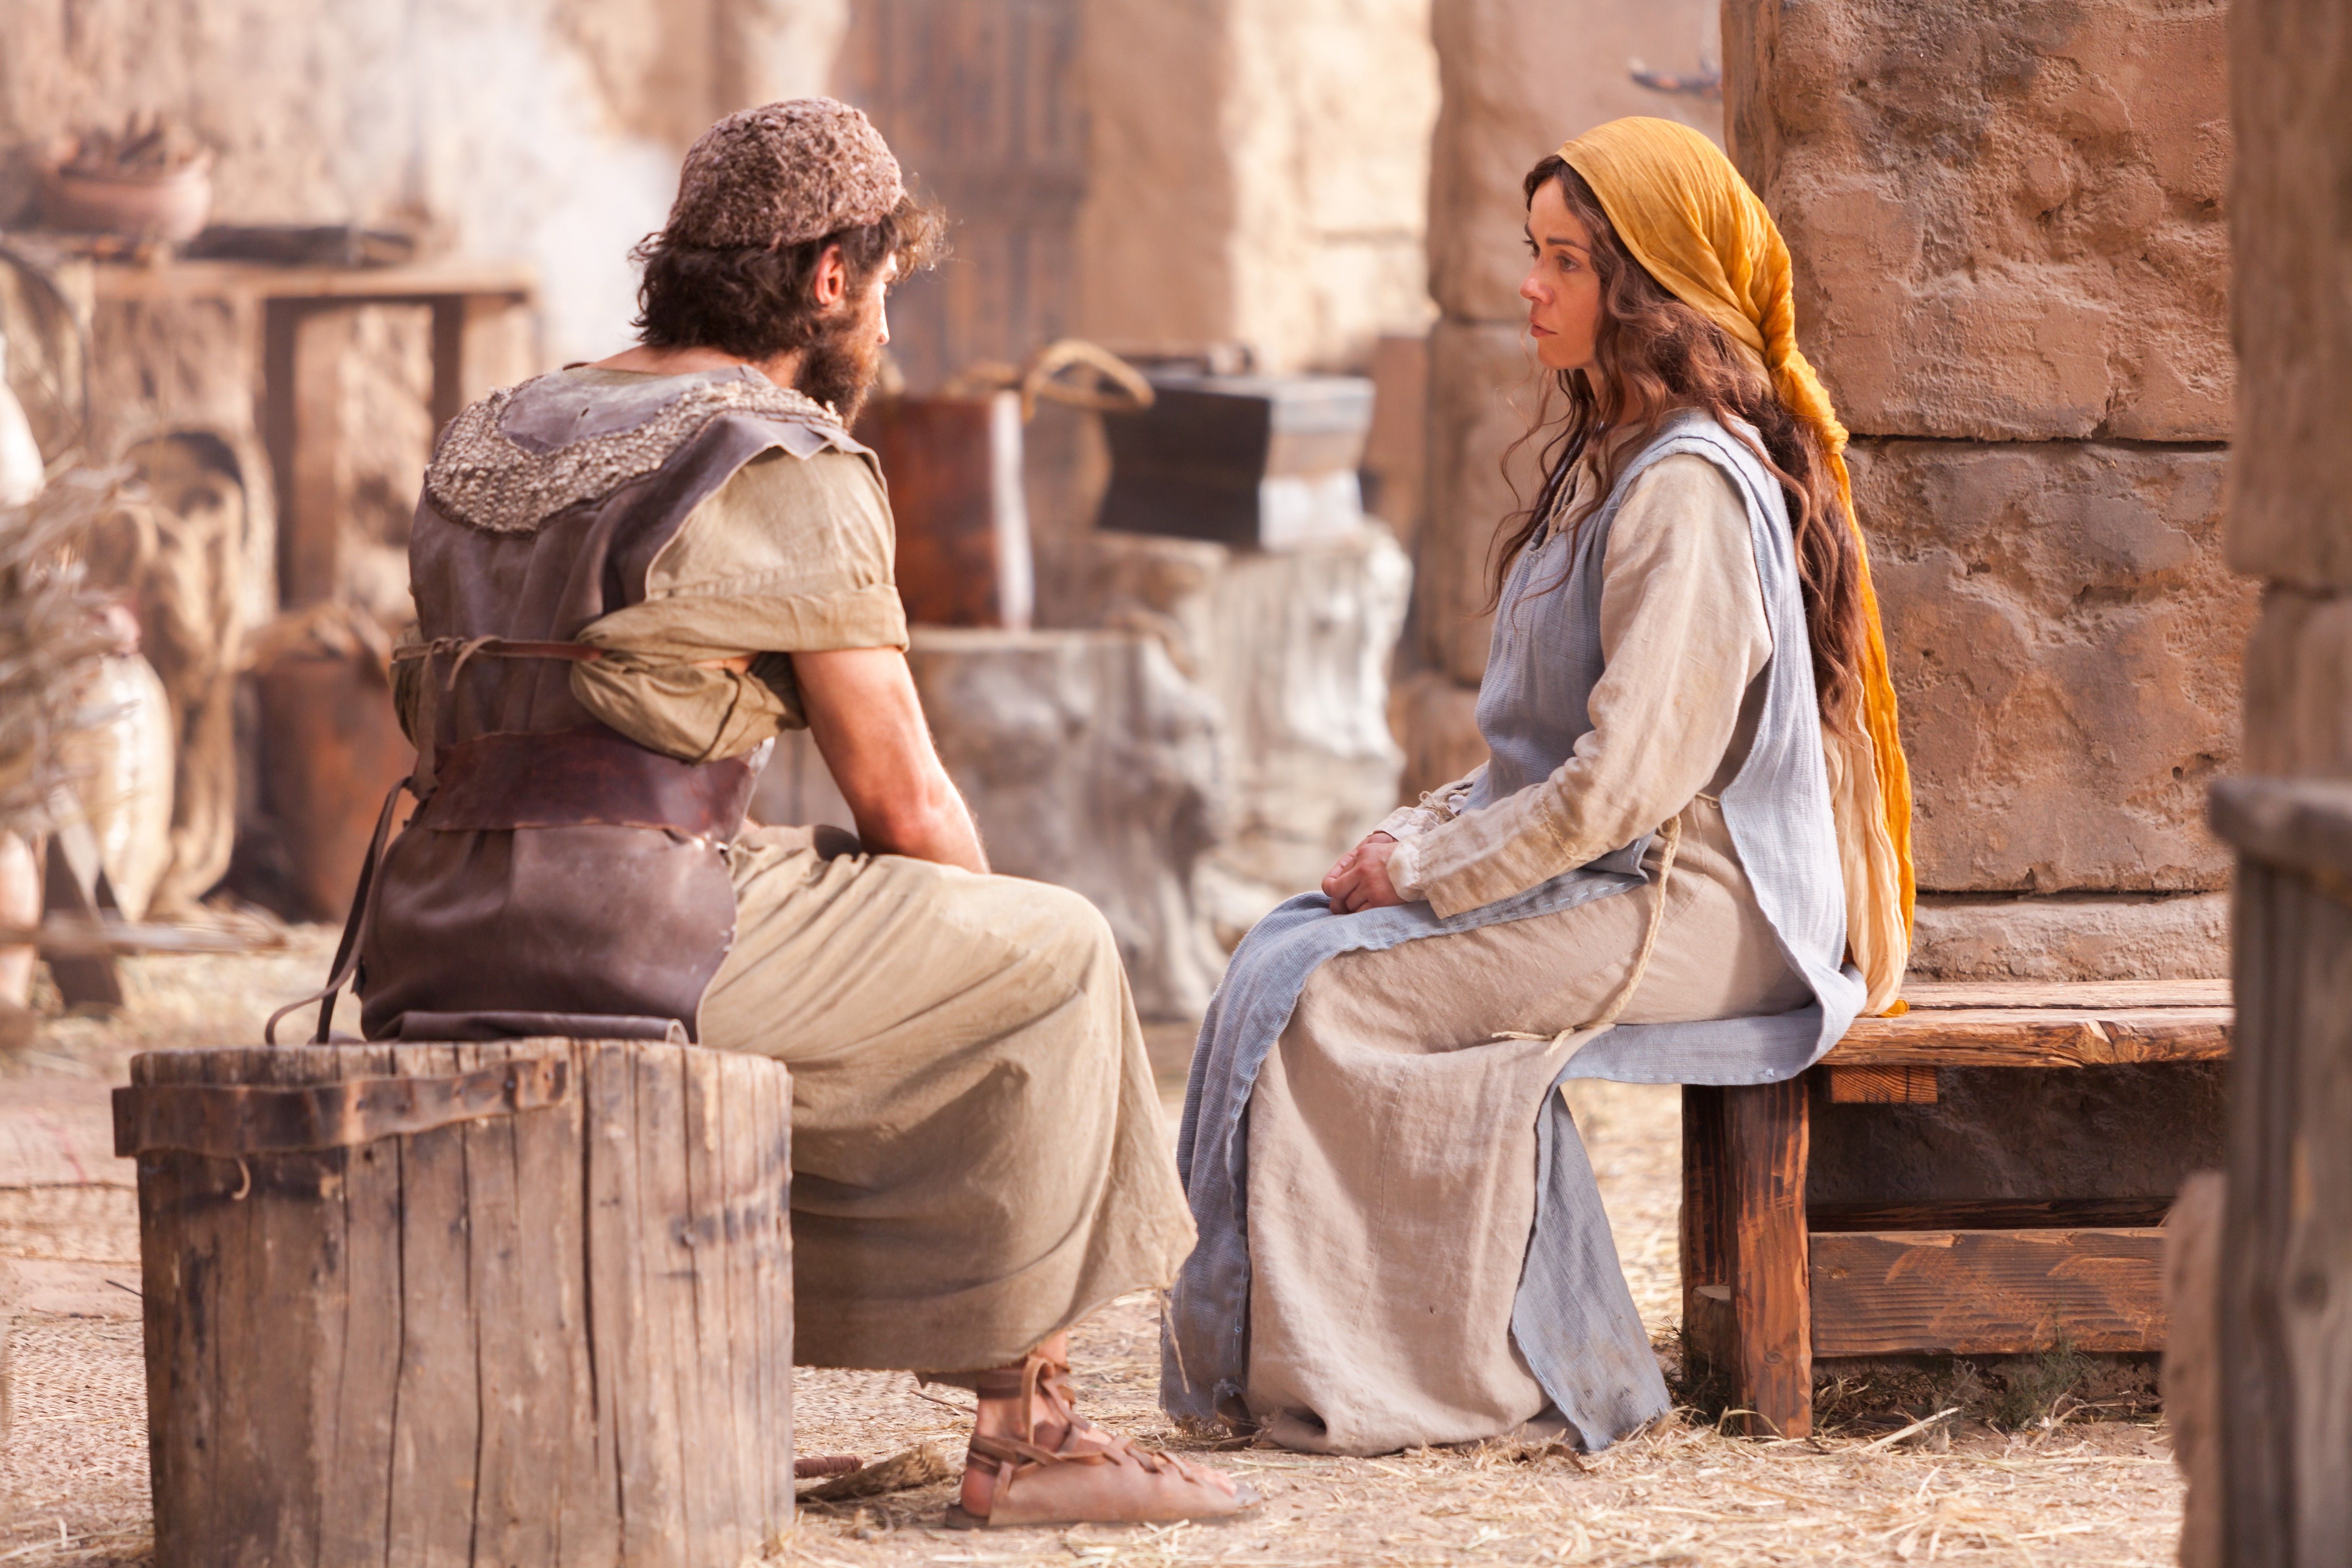 Mary speaks with Joseph to tell him of her miraculous pregnancy.